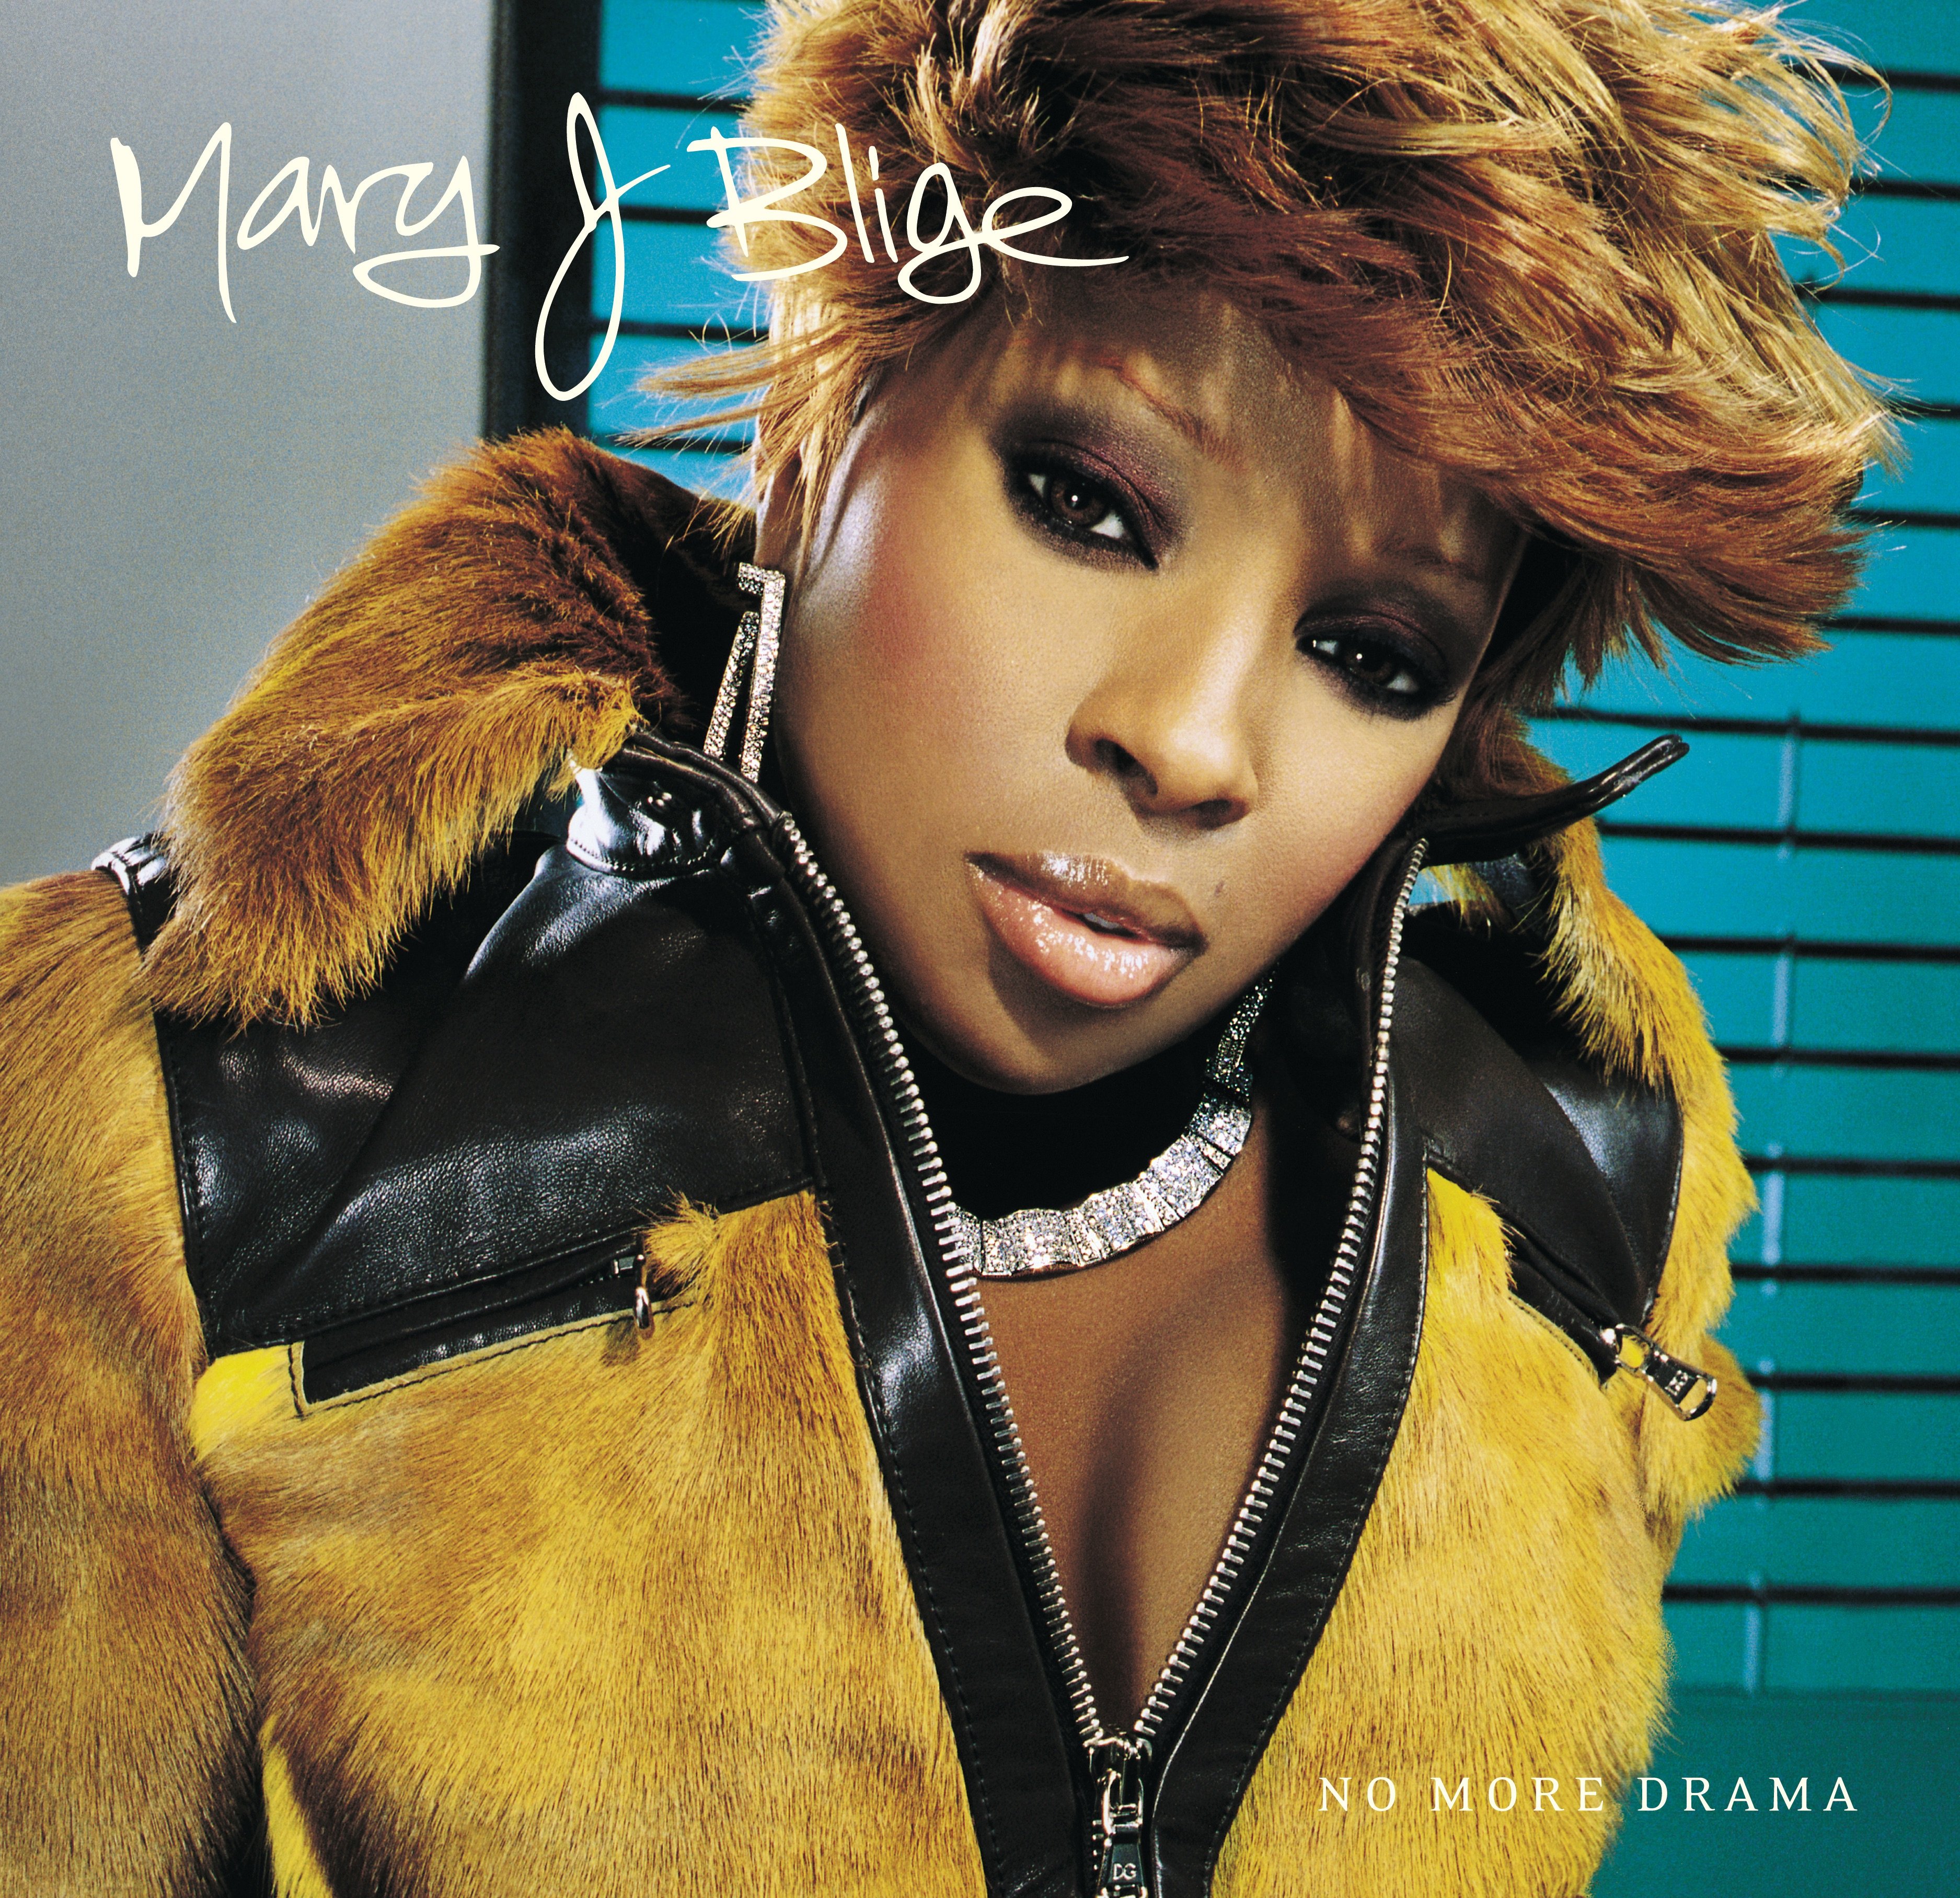 Mary J. Blige-No More Drama-Reissue-CD-FLAC-2002-THEVOiD Download